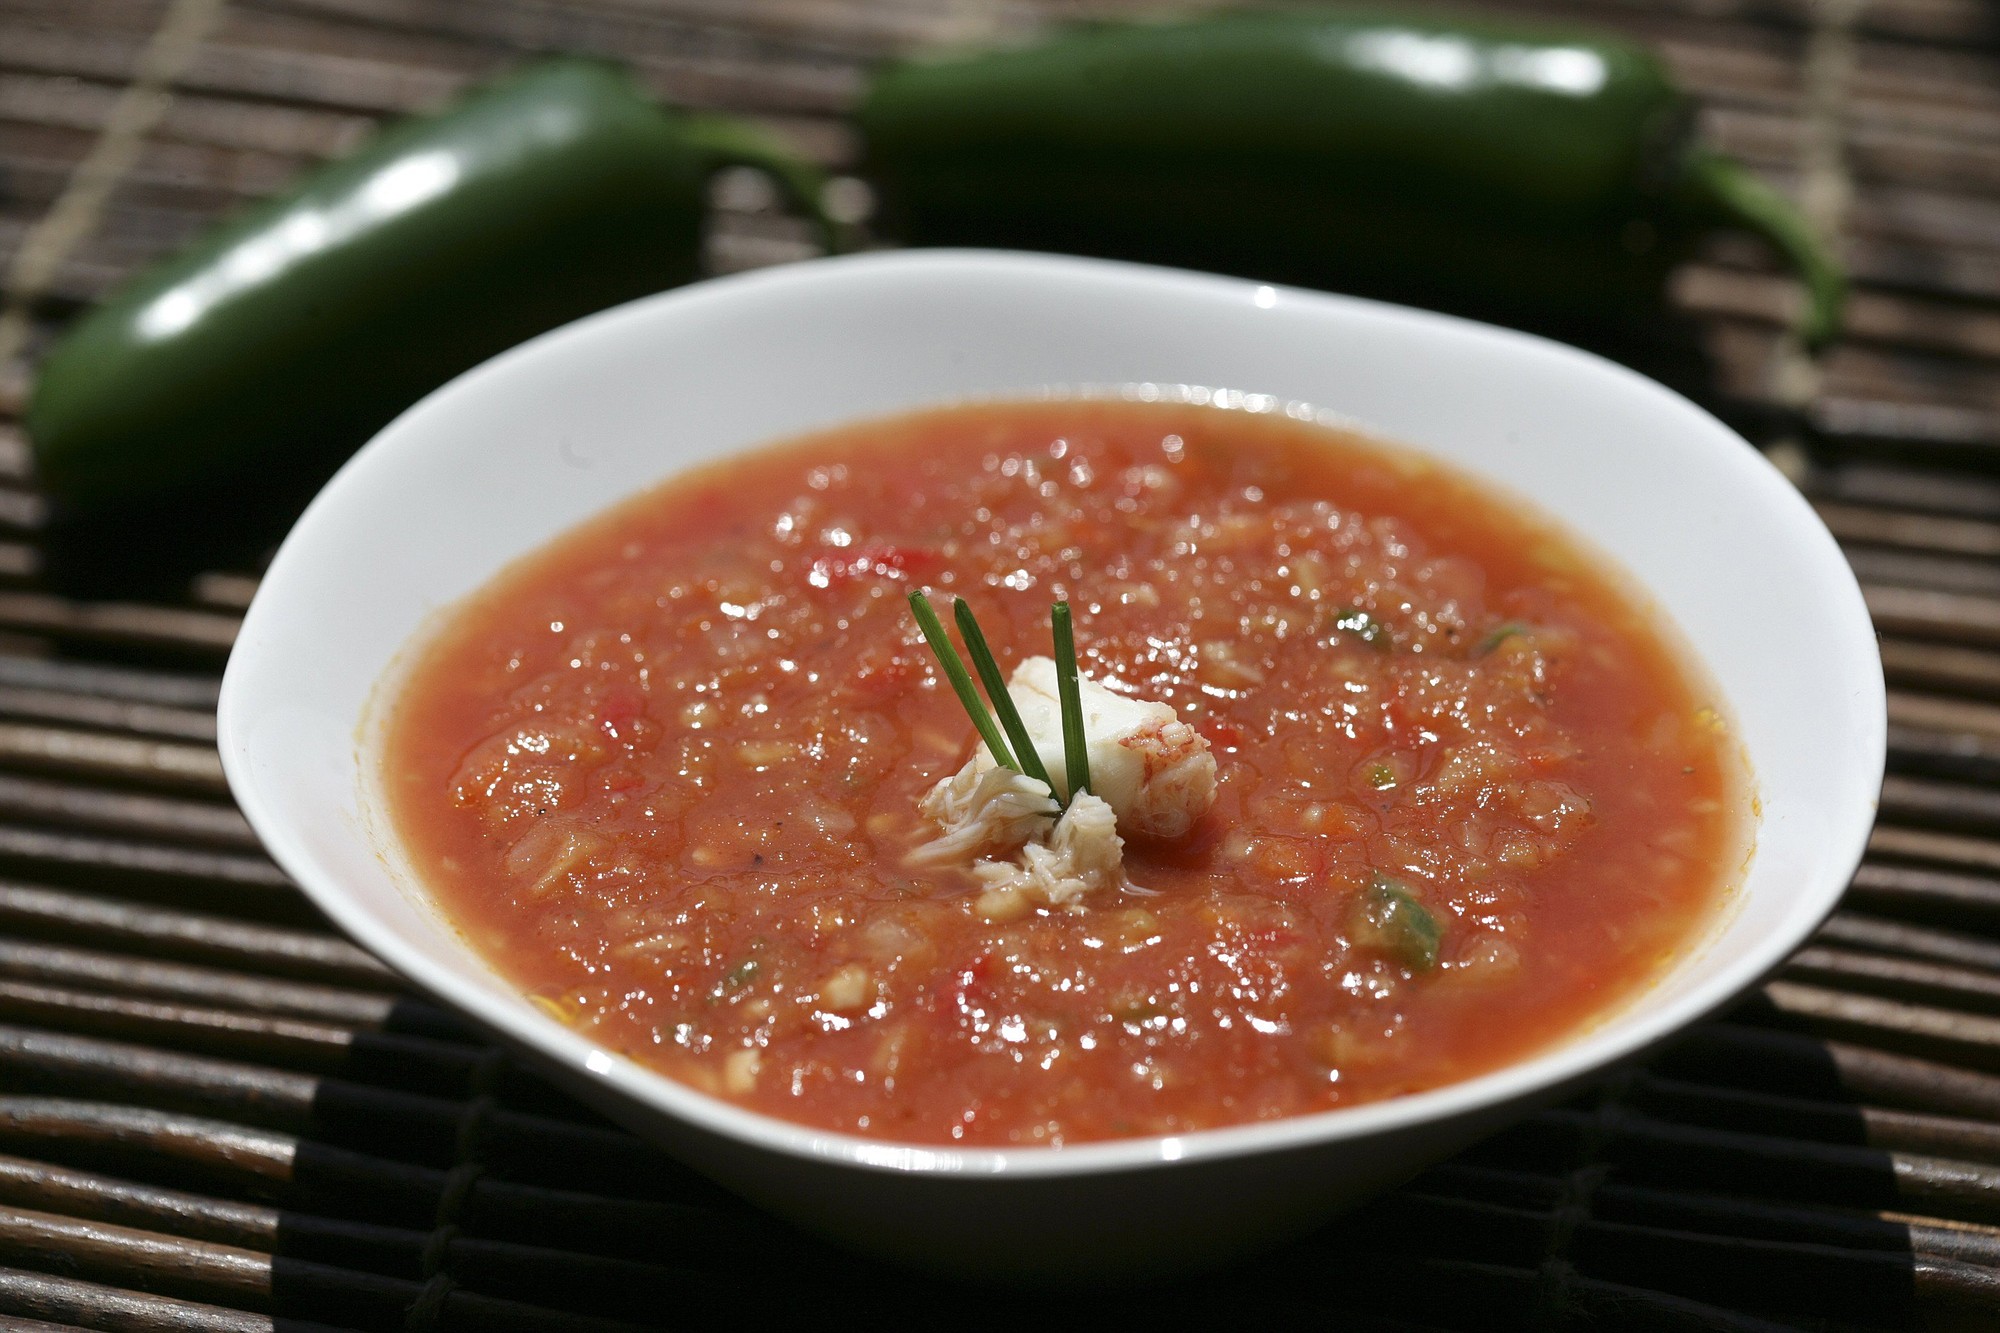 Crab and Chili Pepper Gazpacho makes for a cool summertime soup.